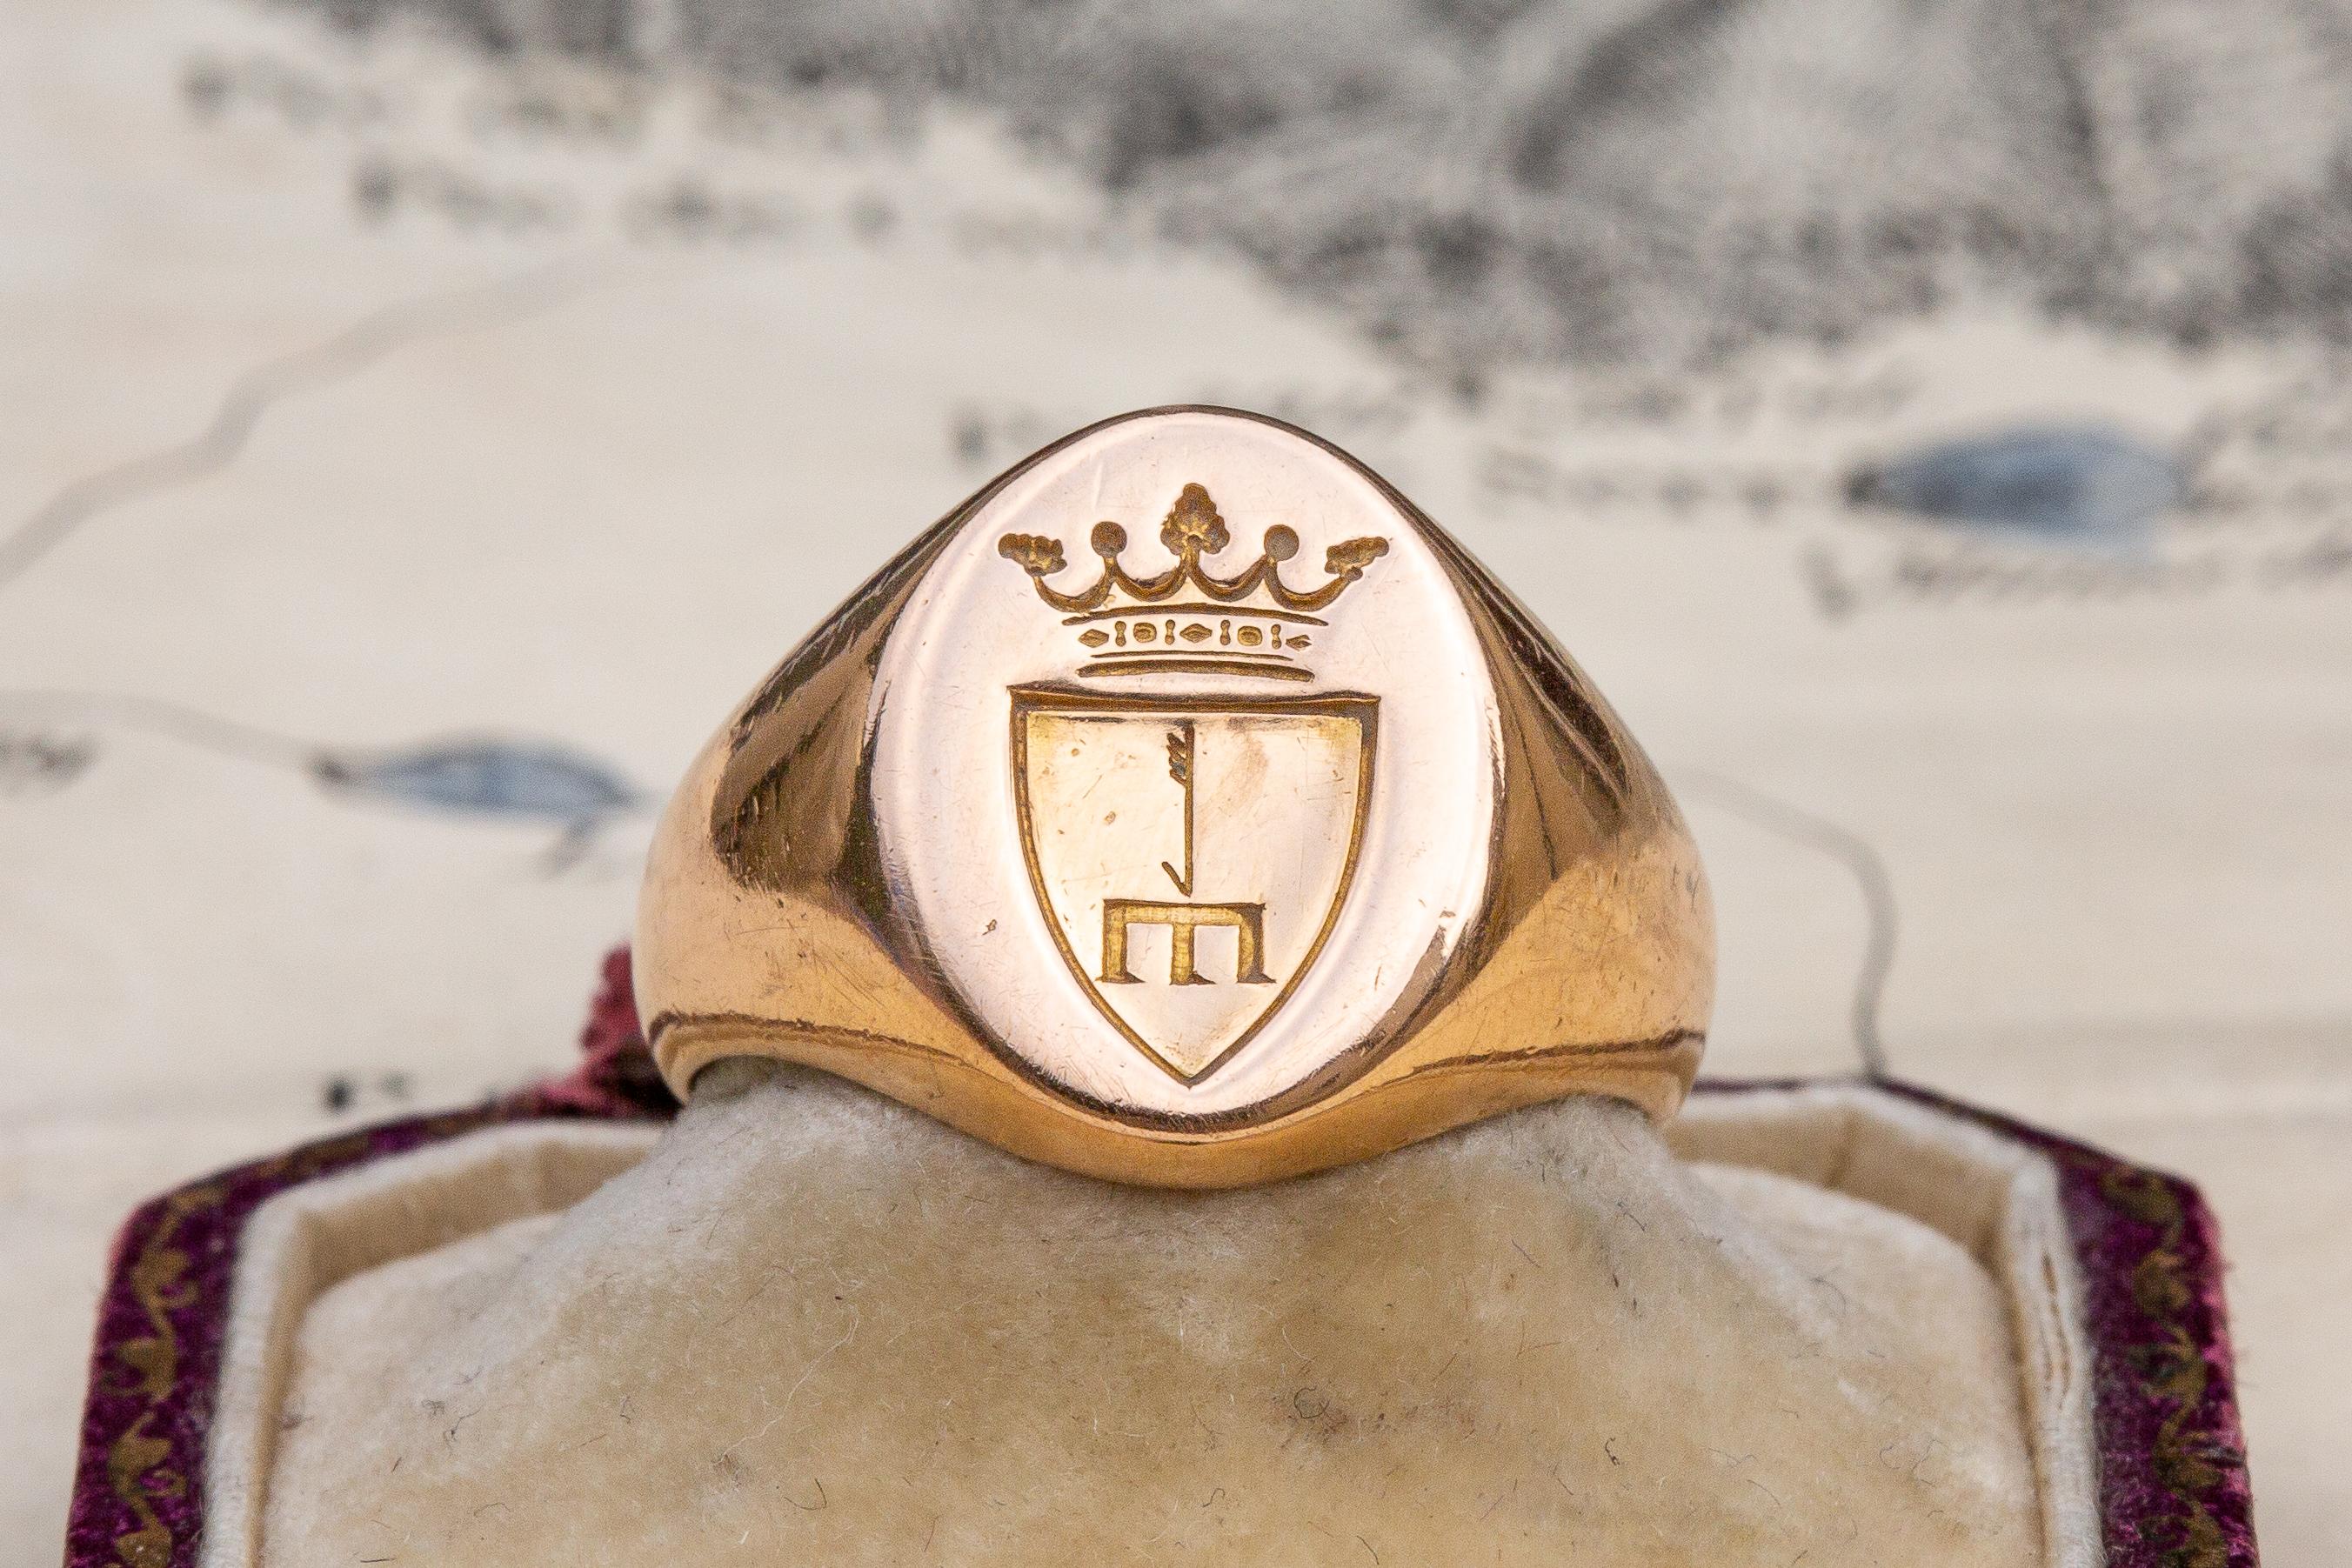 An impressive, scarce and heavy late-19th century hand engraved intaglio signet ring. The bezel is intricately carved to depict a Polish or Eastern European coat of arms. Based on the coronet above the shield we can deduce that this coat of arms